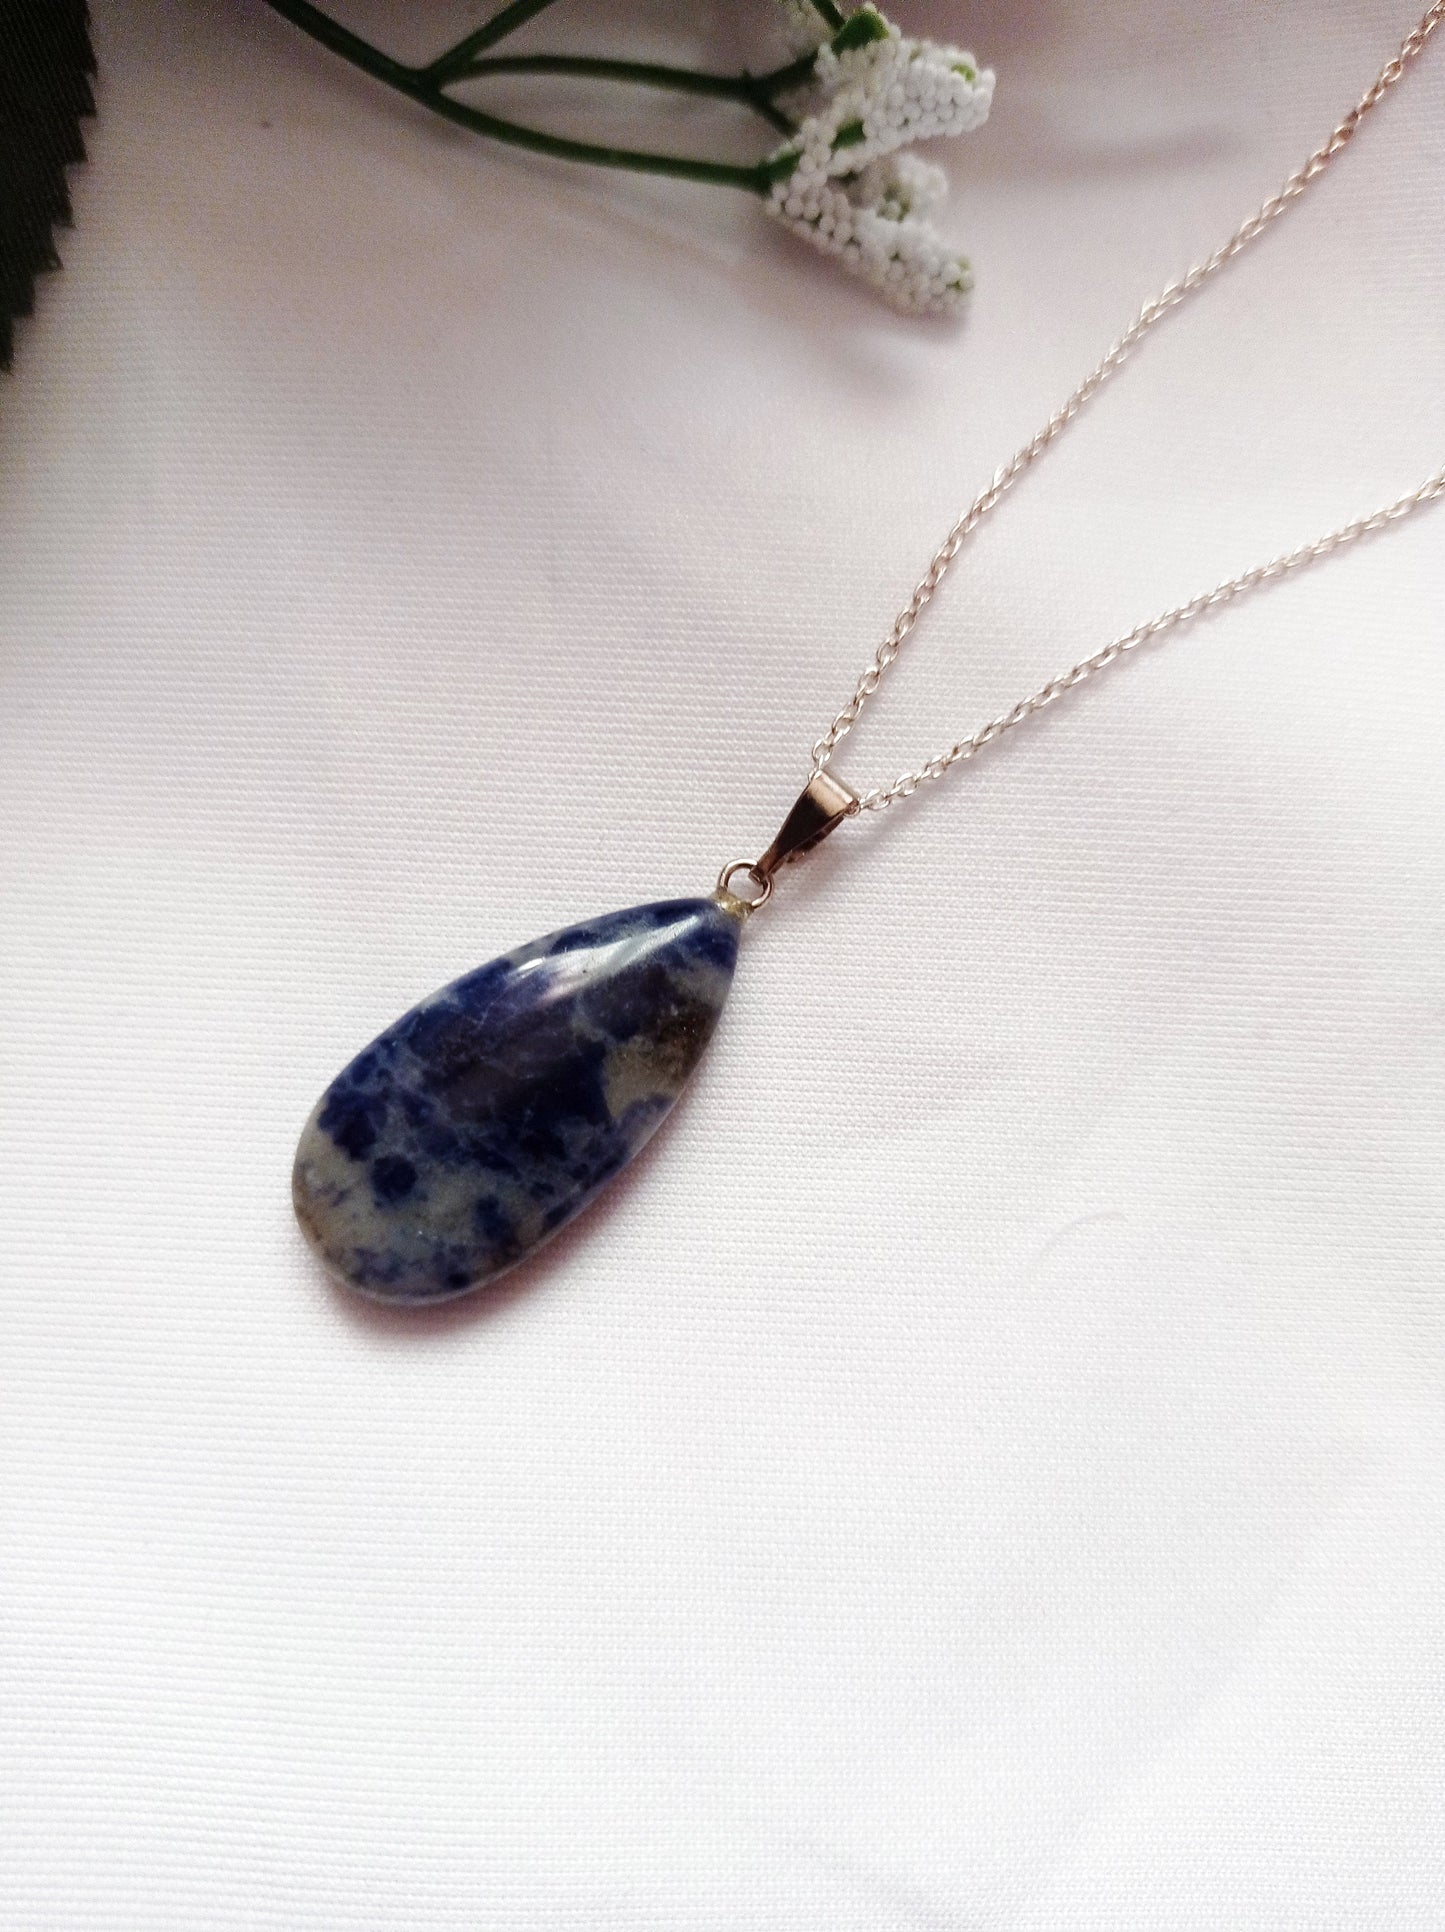 Sodalite Sterling Silver Necklace, Sodalite Pendant Necklace, Gemstone Necklace | by nlanlaVictory-9